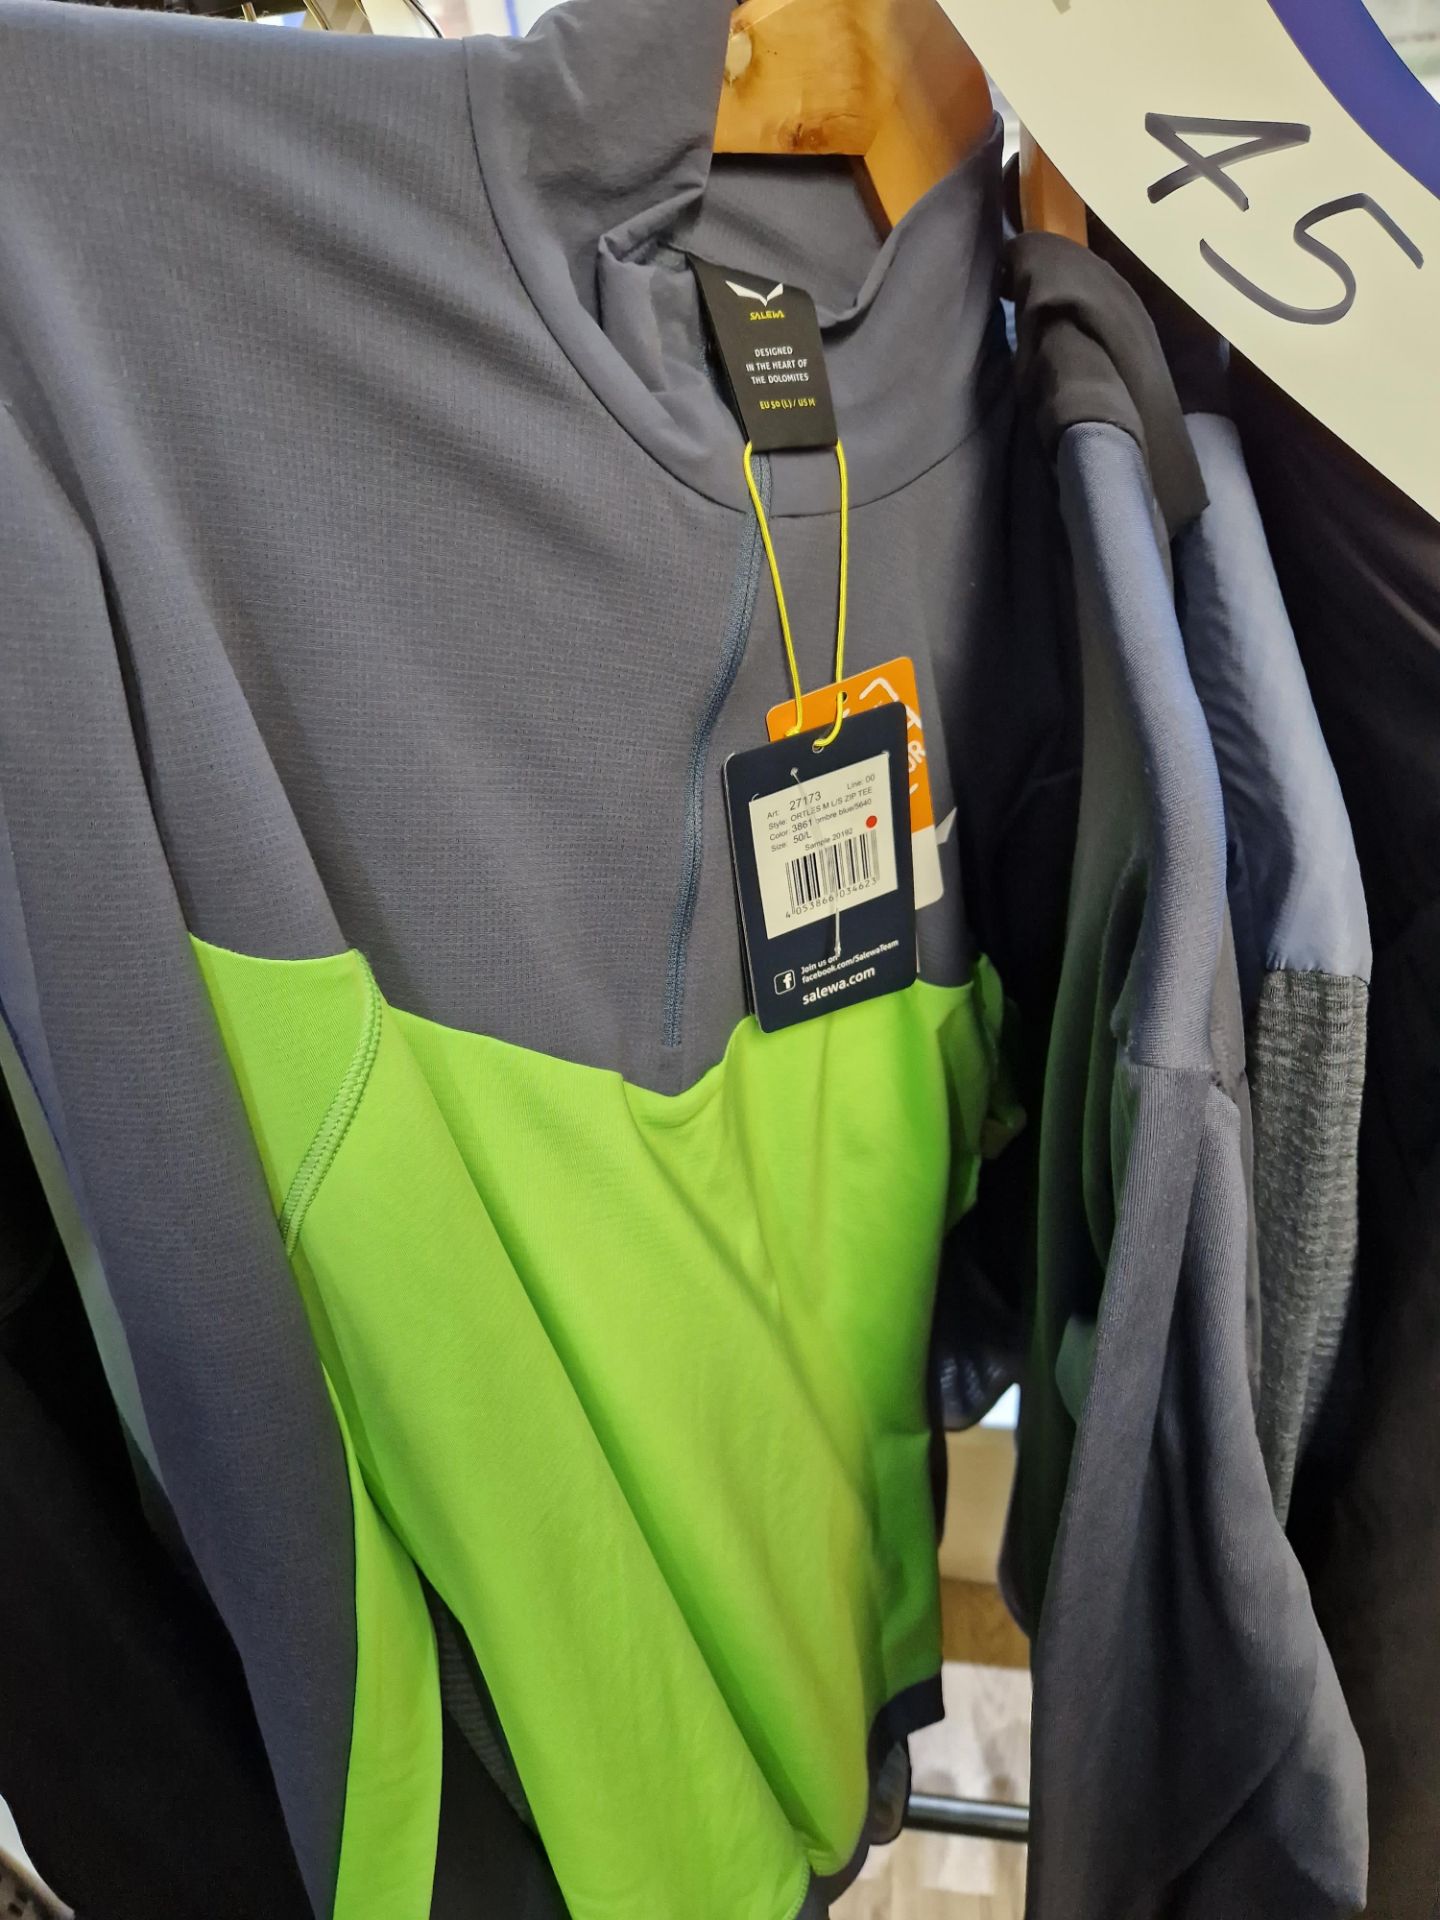 Five Salewa Pedroc / Ortles / Sella Jackets and Zip Tees, Colours: Black Out / Flint Stone, Ombre - Image 4 of 5